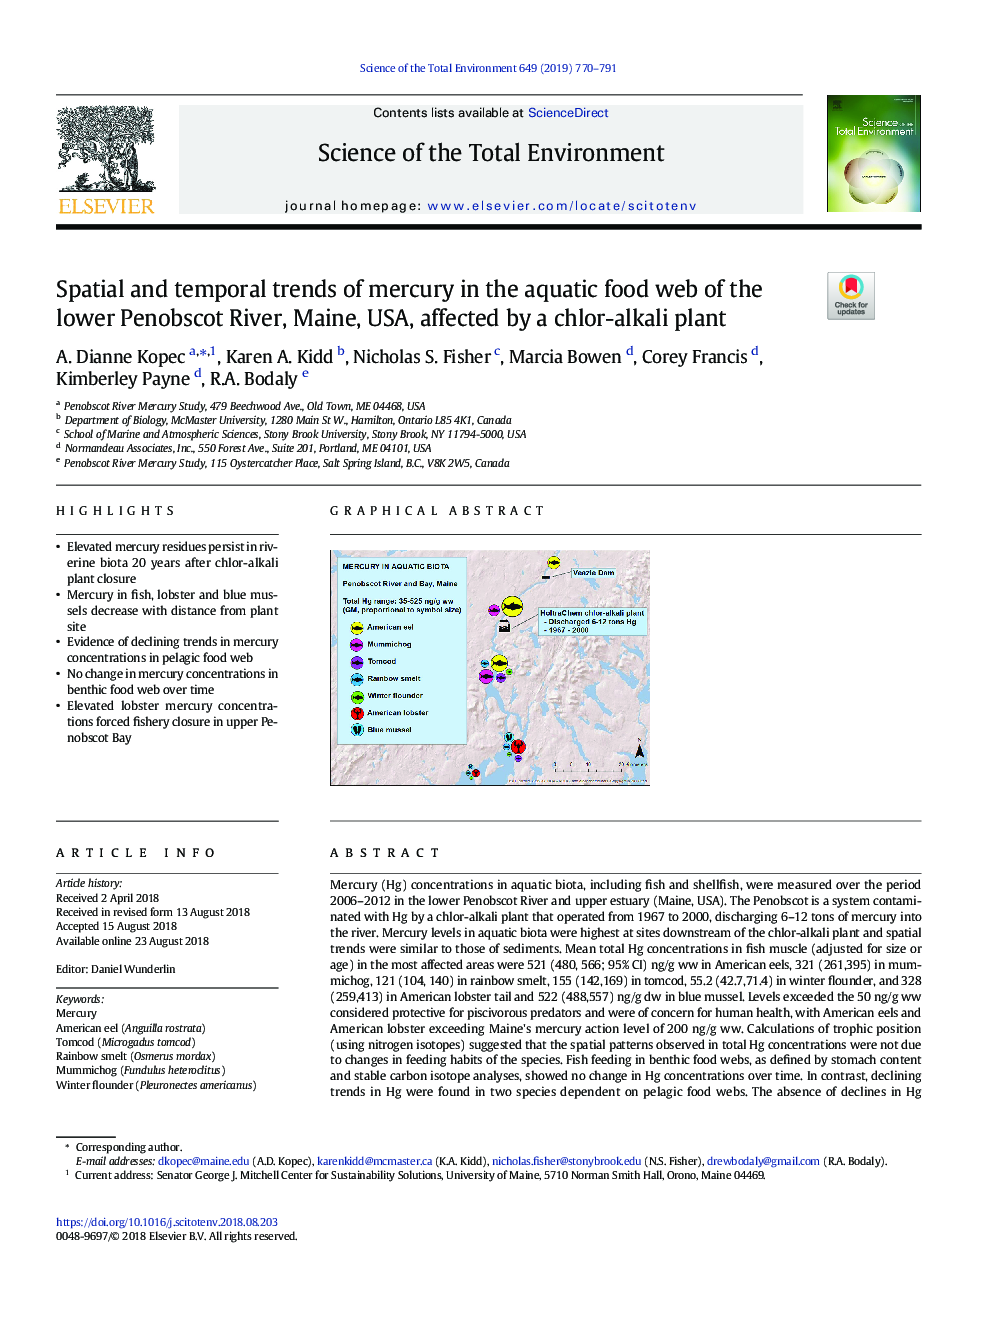 Spatial and temporal trends of mercury in the aquatic food web of the lower Penobscot River, Maine, USA, affected by a chlor-alkali plant